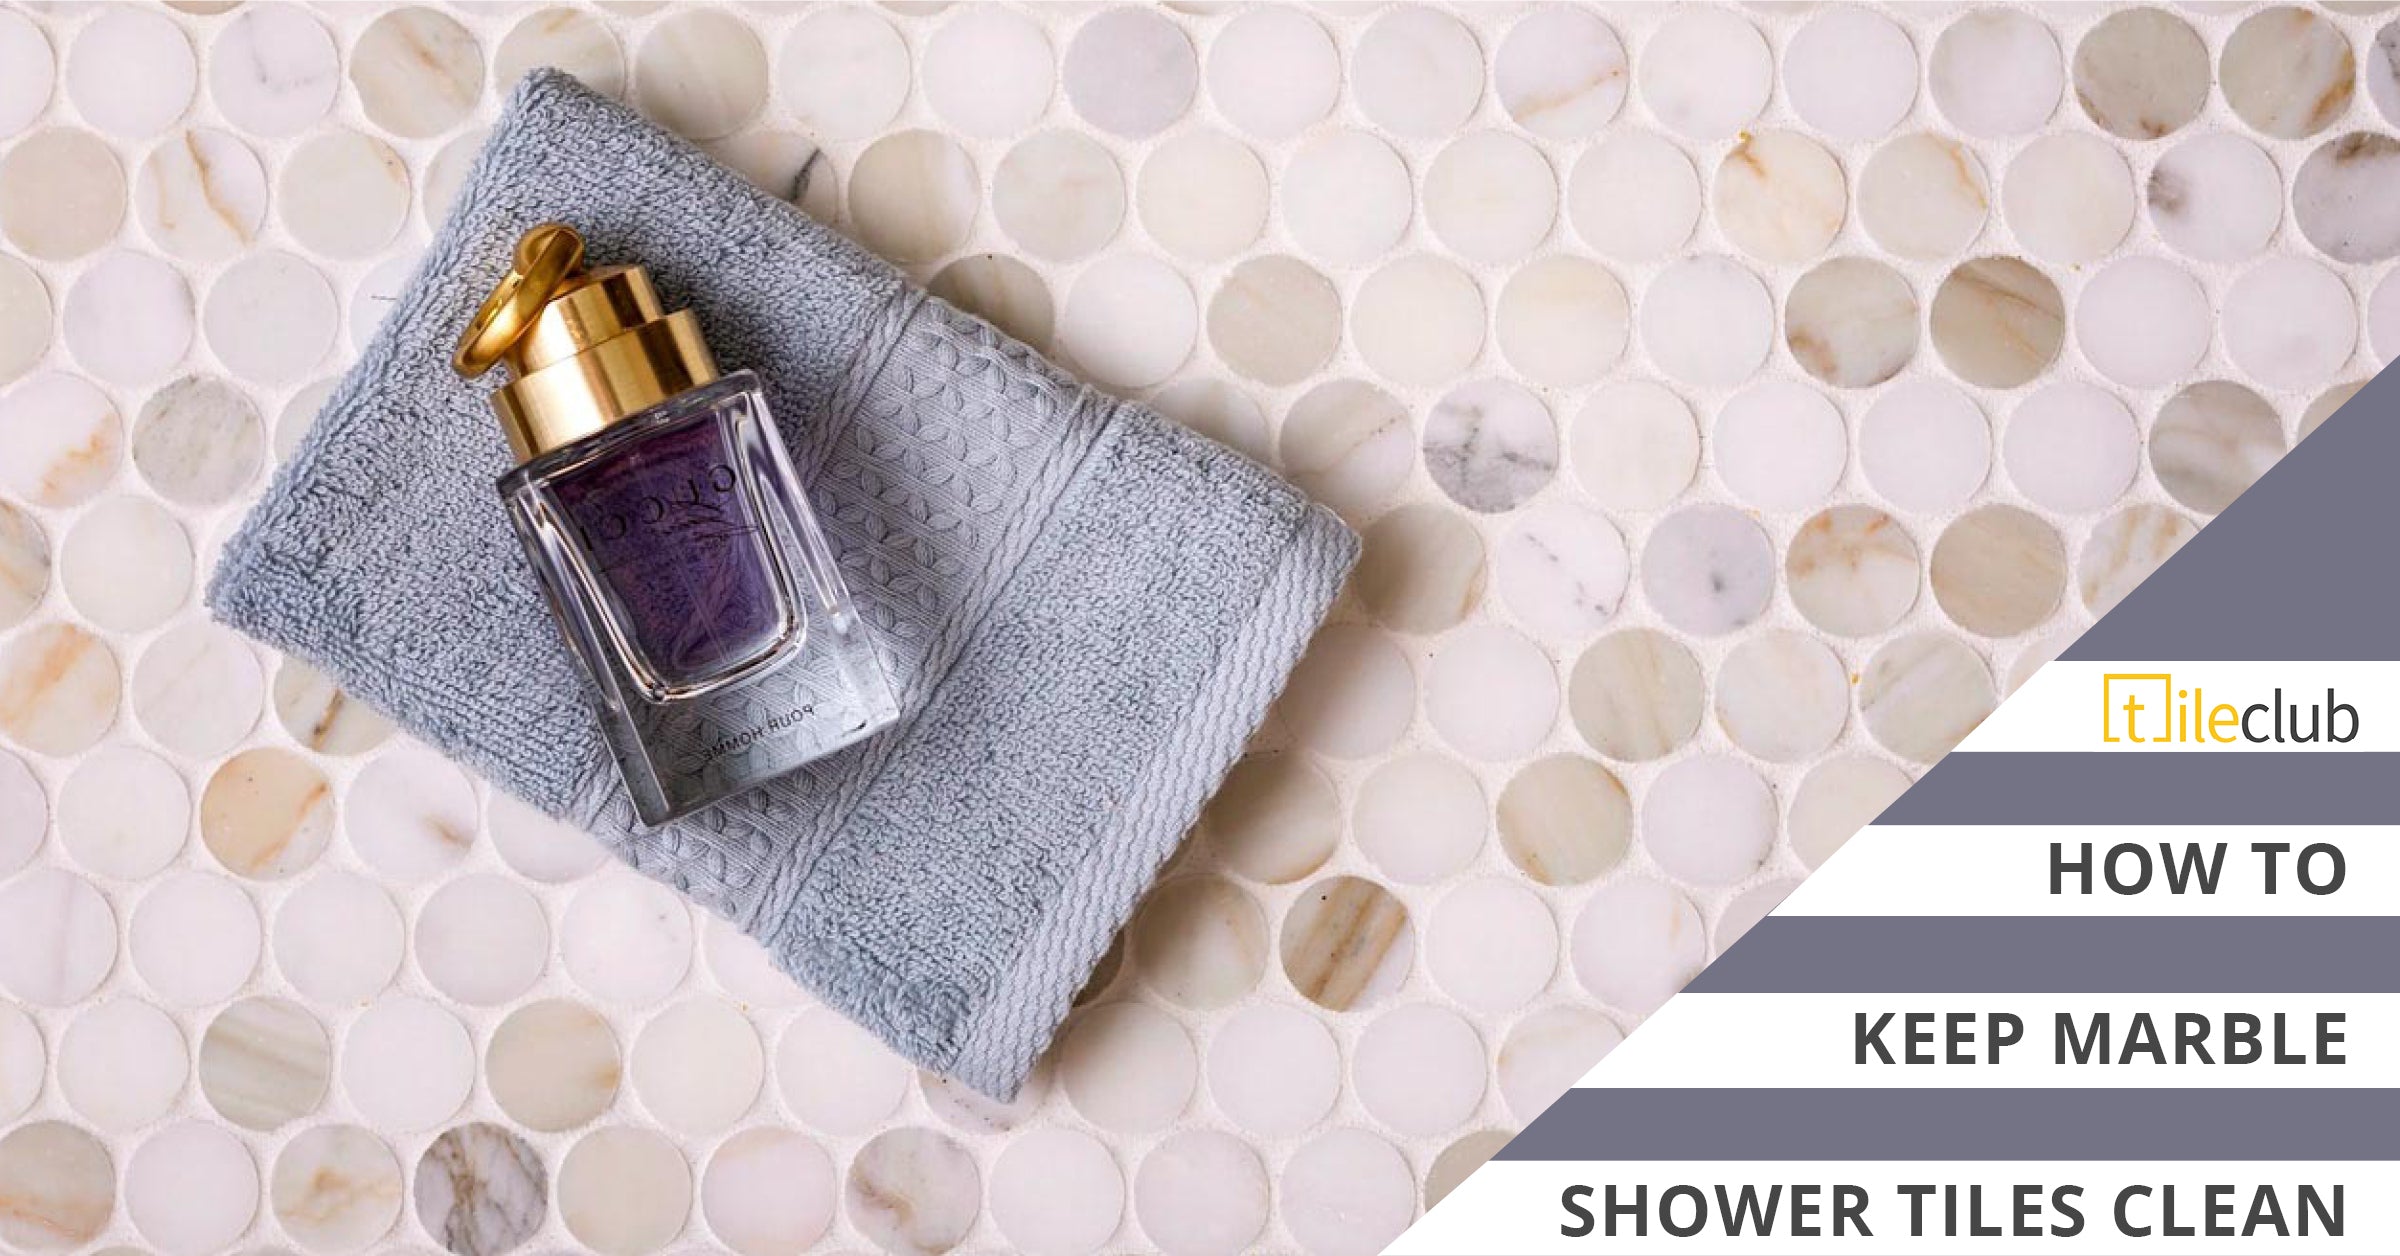 How to Clean Marble Shower Tiles & Keep them Stain-Free